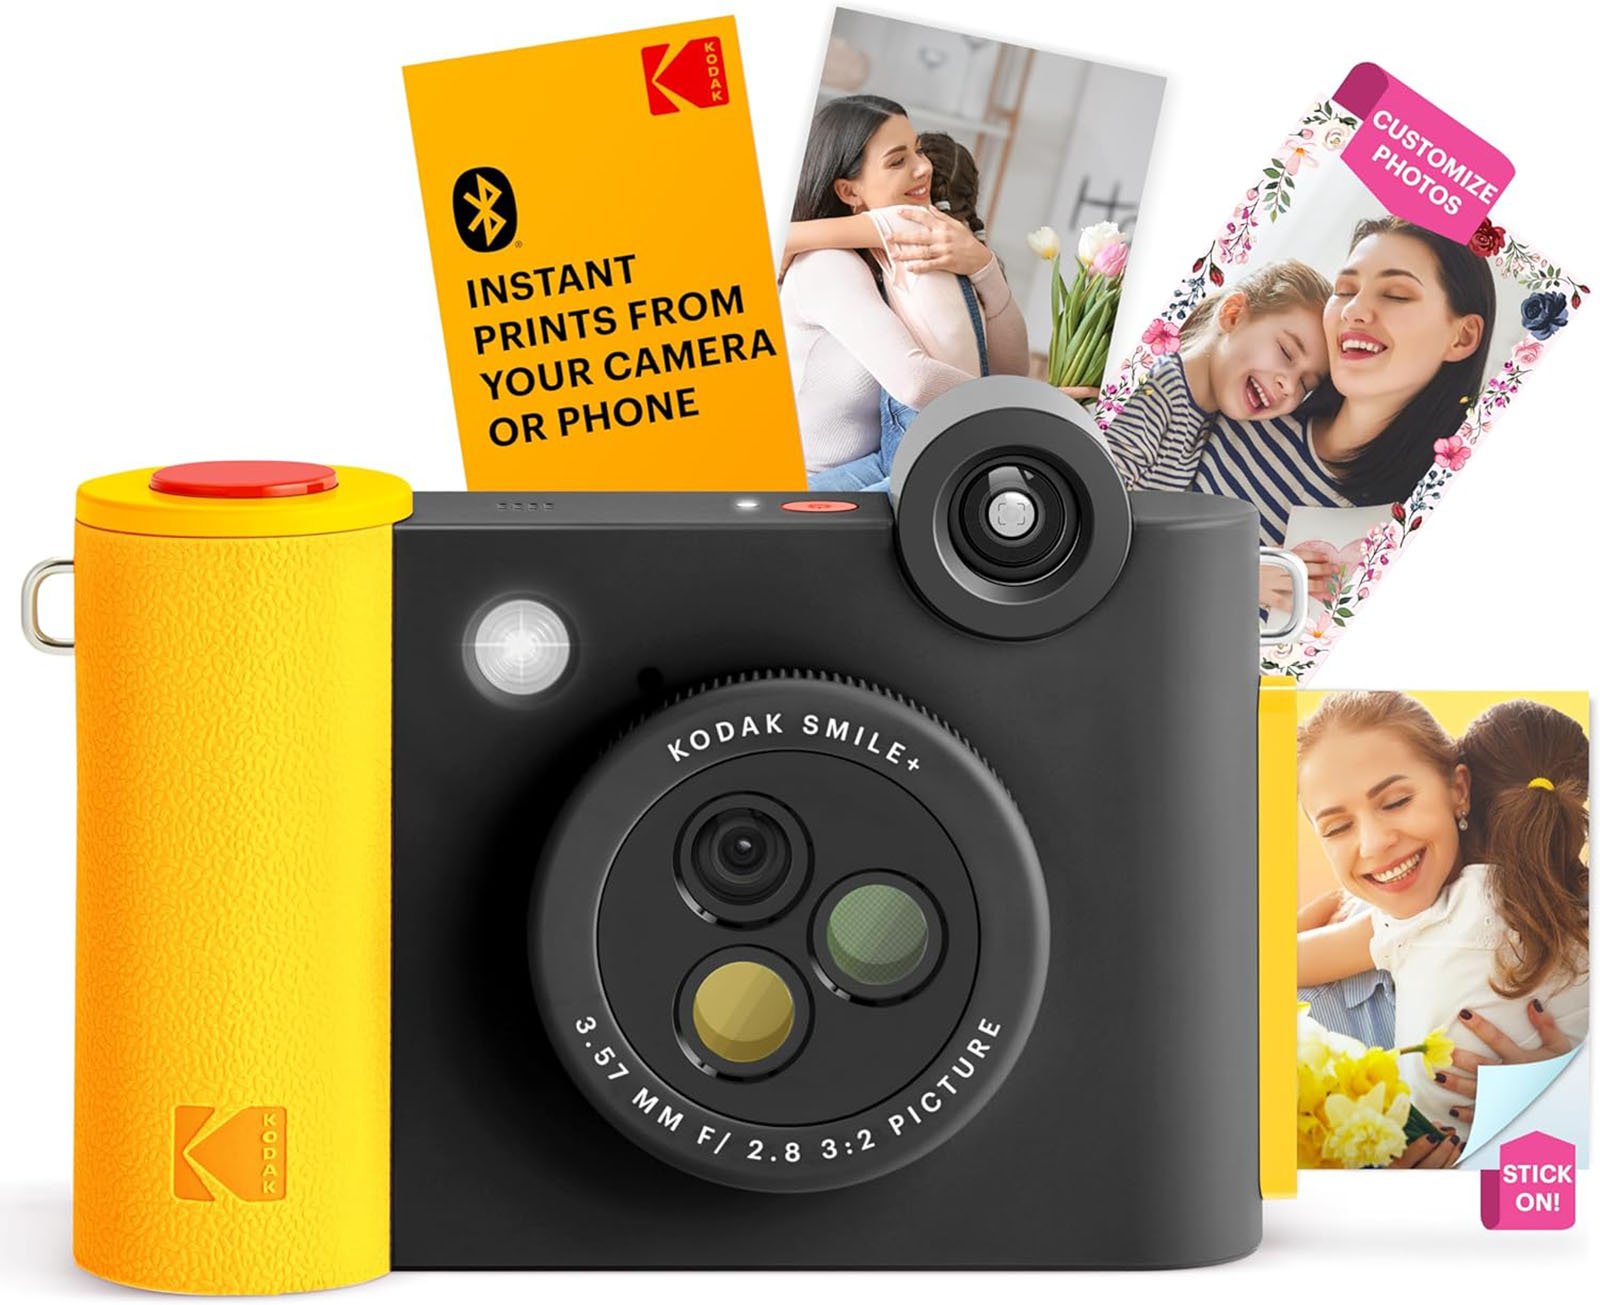 A Kodak Smile instant print digital camera, presented in black and yellow, surrounded by printed photographs and its retail packaging emphasizing instant prints from camera or phone.